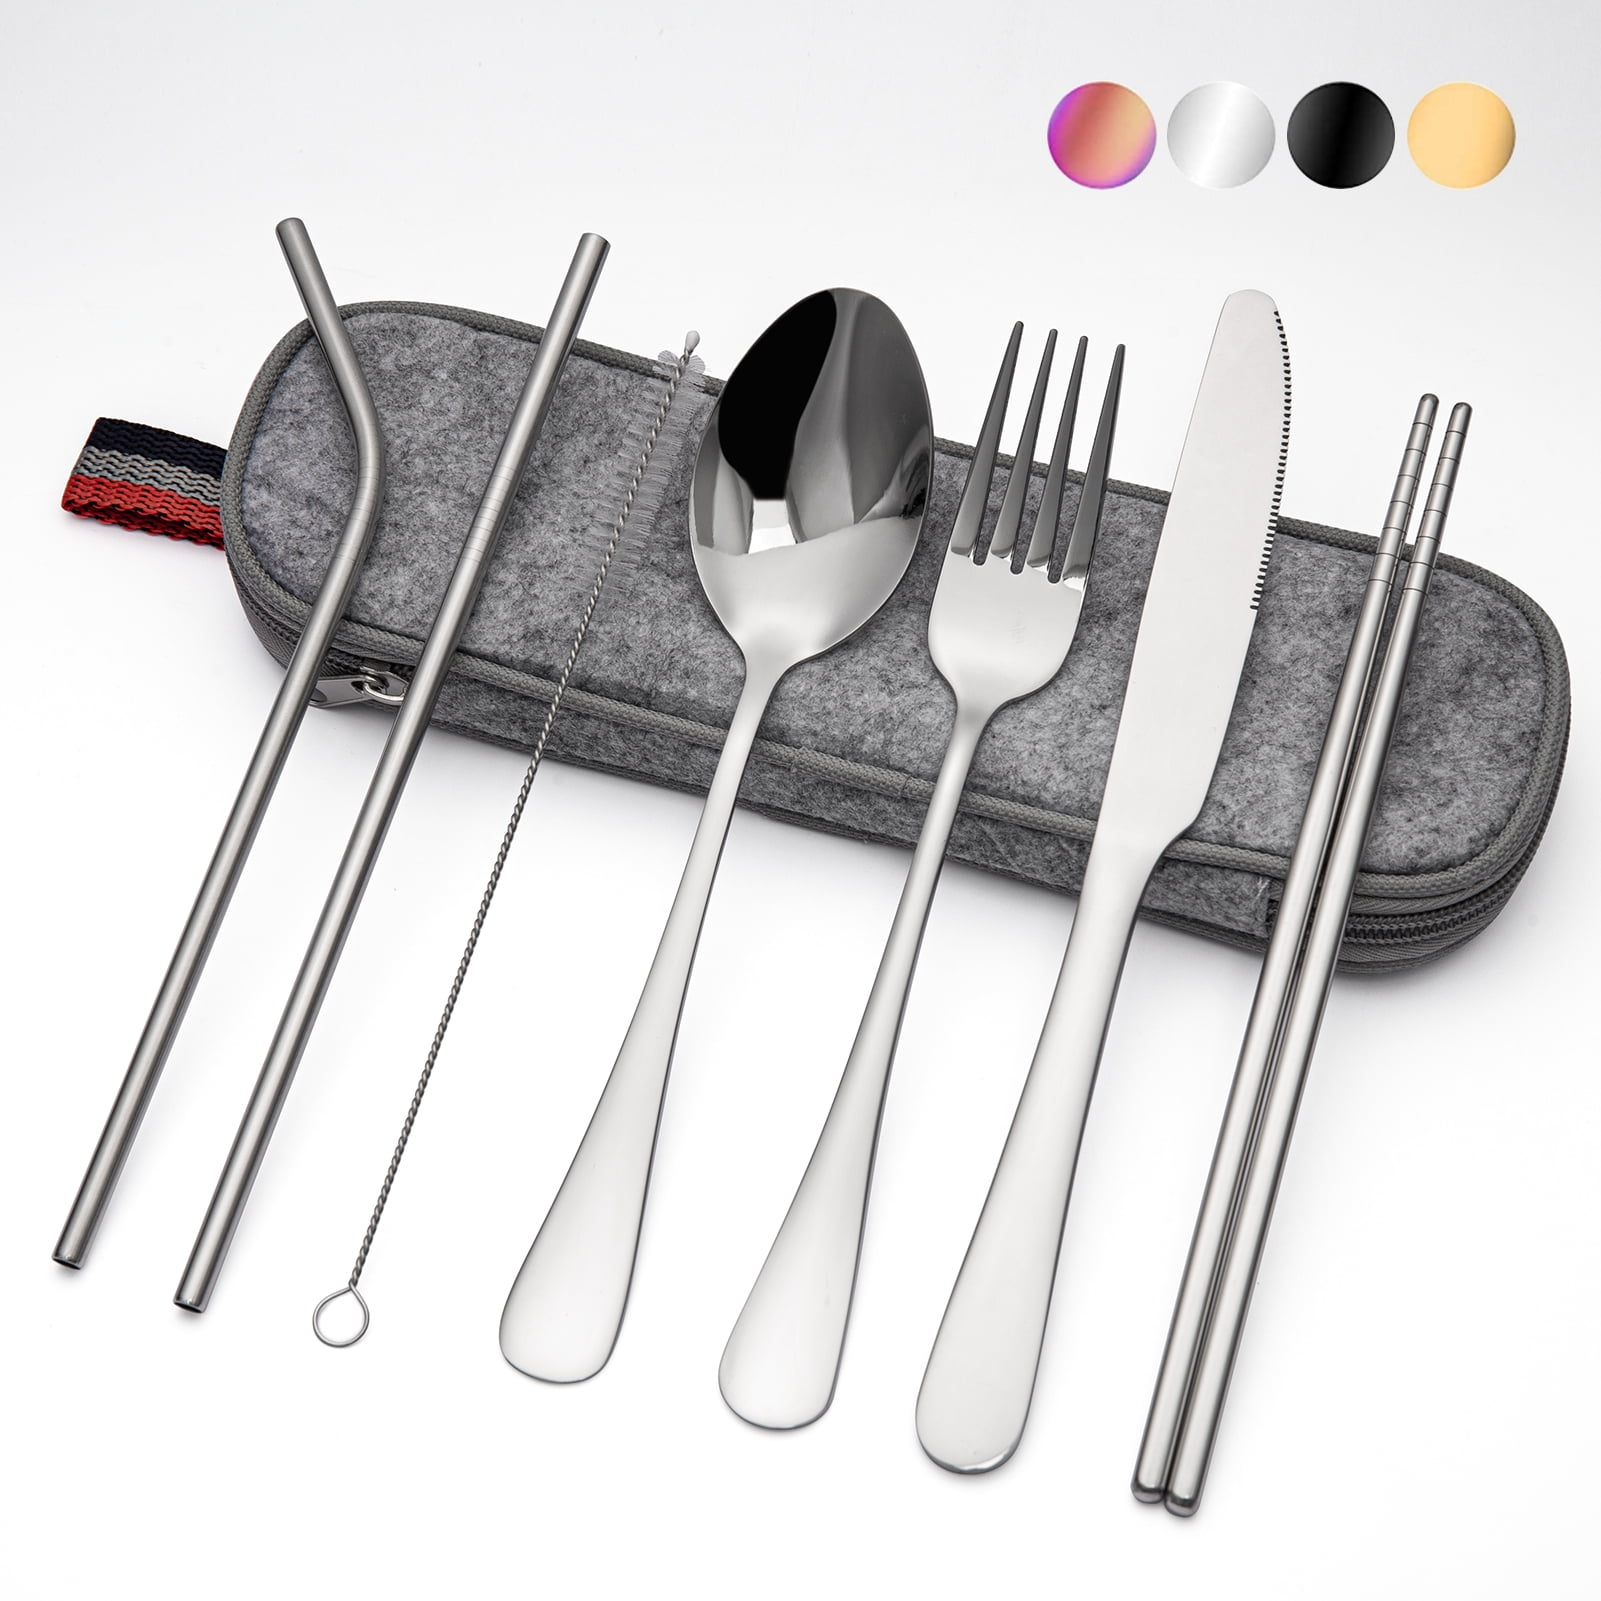 INKULEER Travel cutlery set, 18/8 stainless steel cutlery, Reusable  utensils set with case, Portable Silverware Lunch Box for Camping and Office